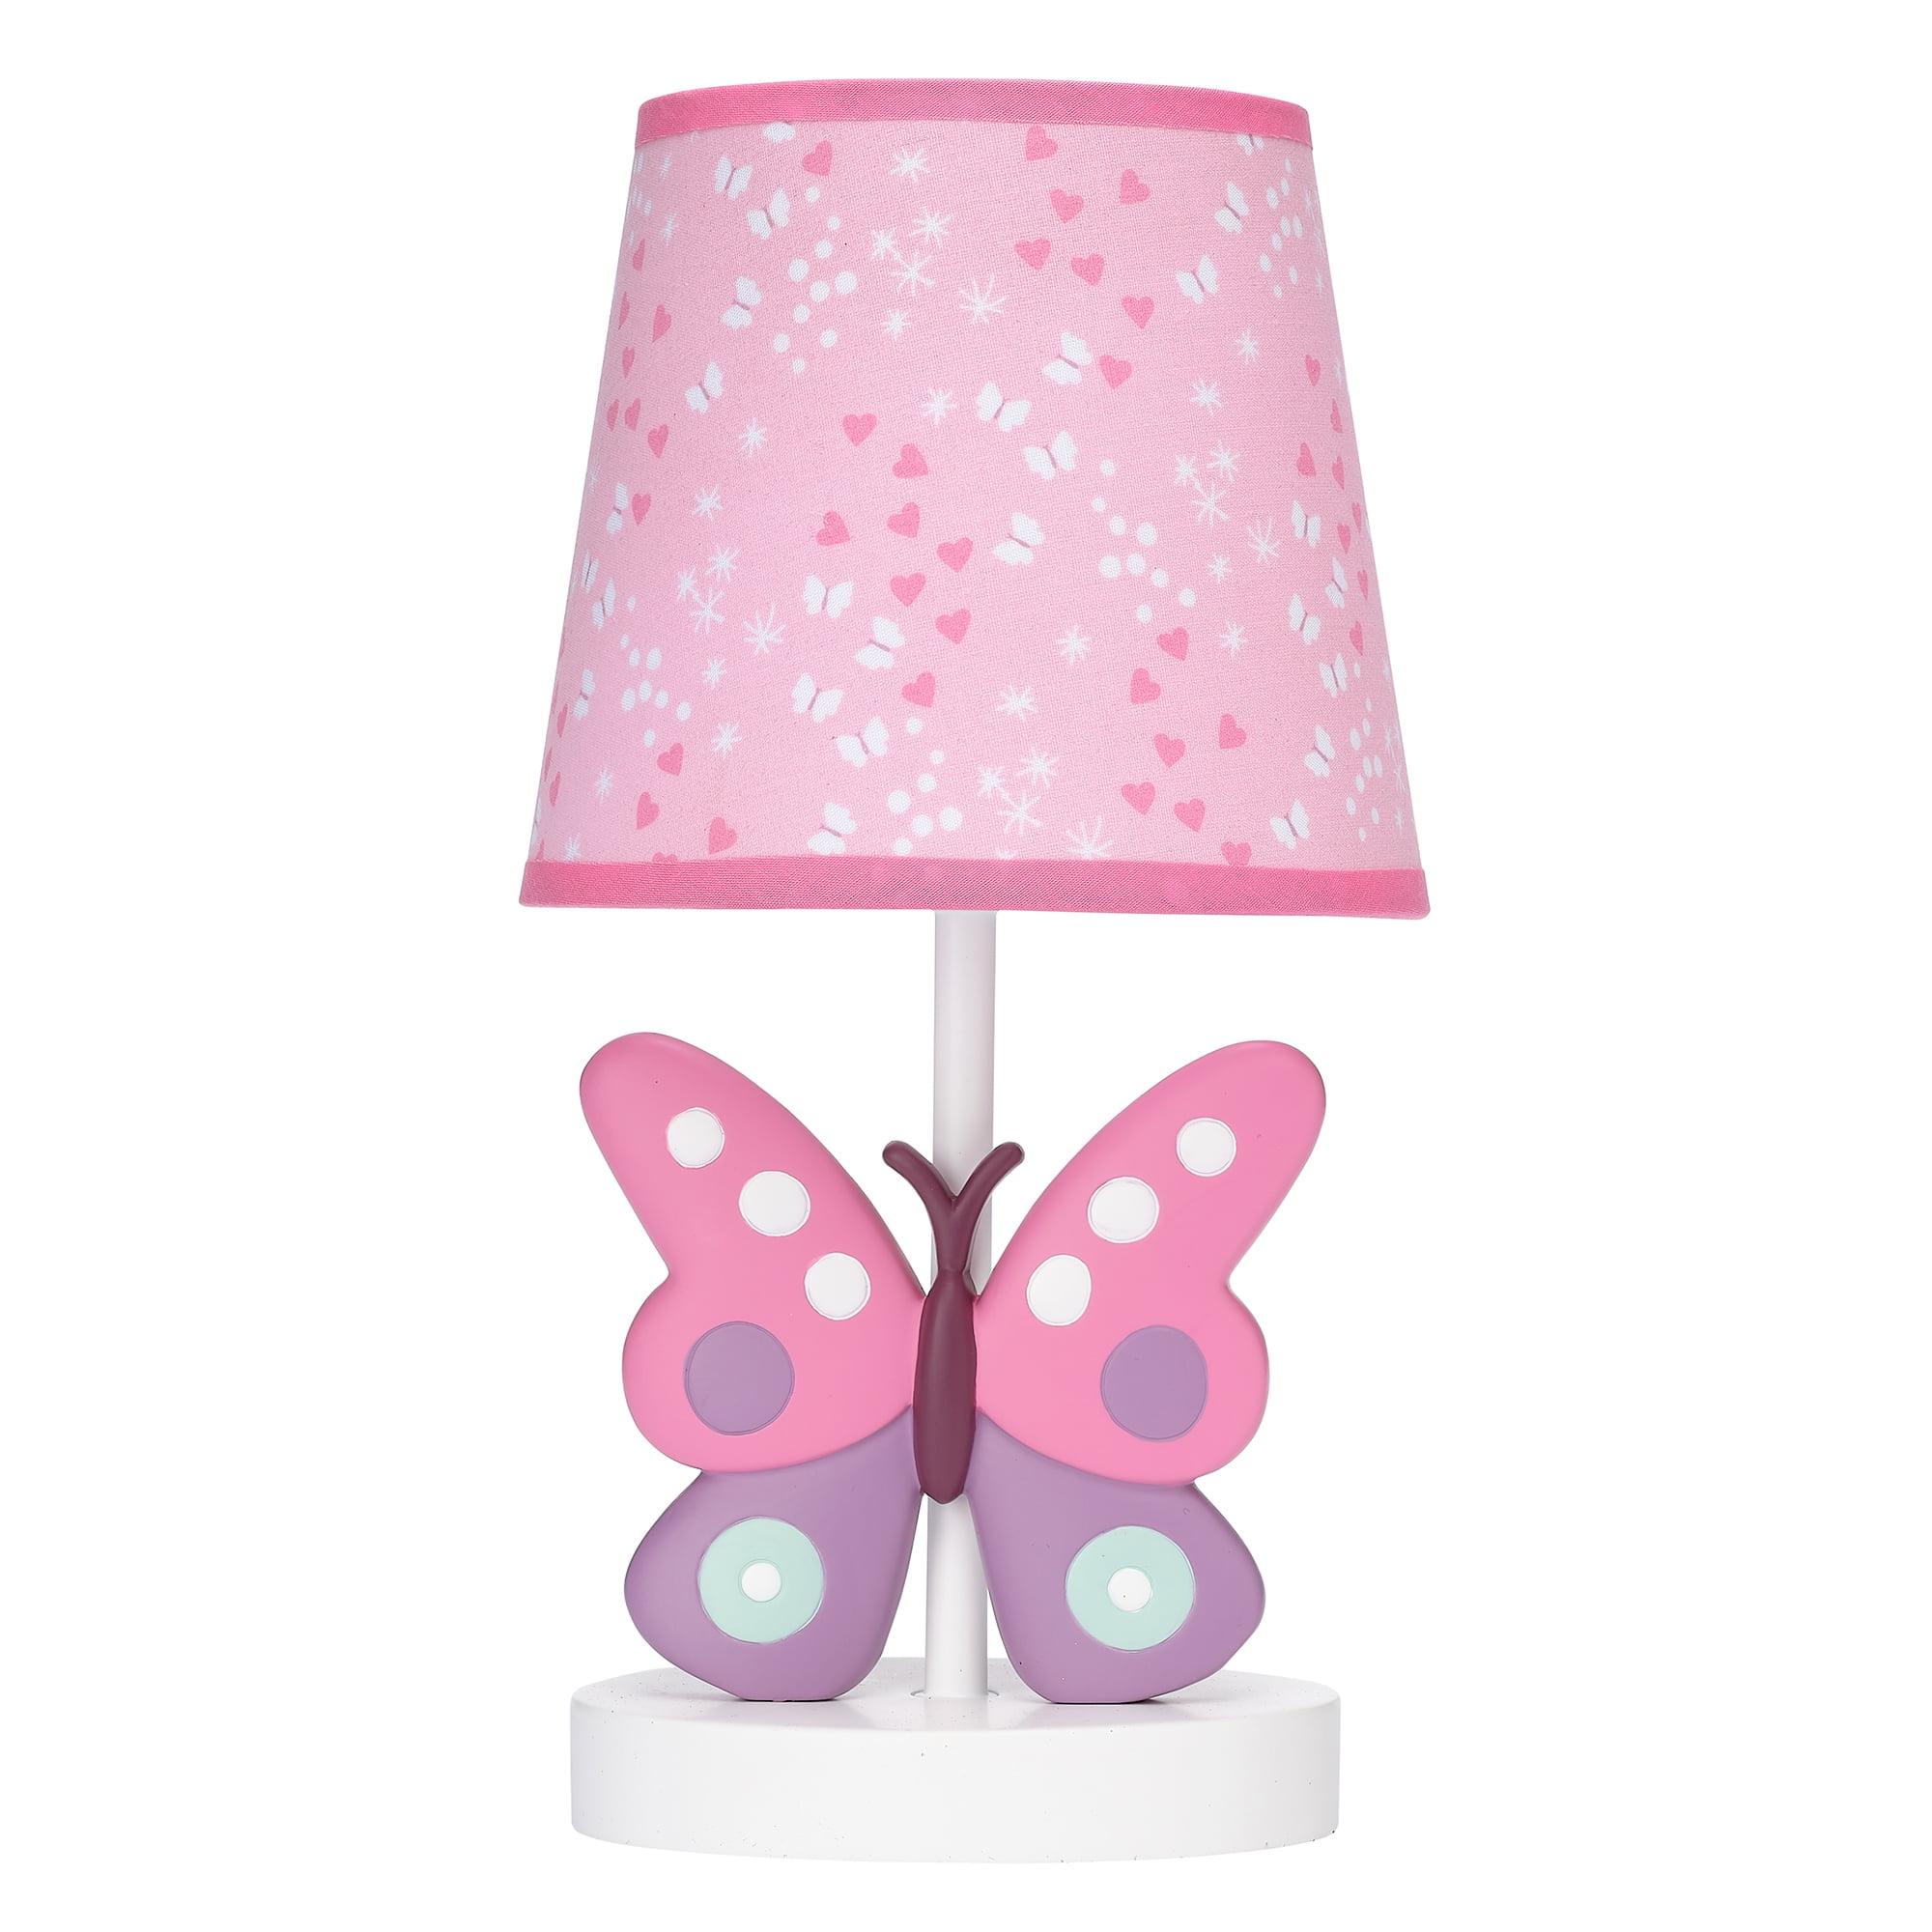 Pink Disney Minnie Mouse 2 in 1 Table Lamp with Nightlight 11.5 H x 5.5 W